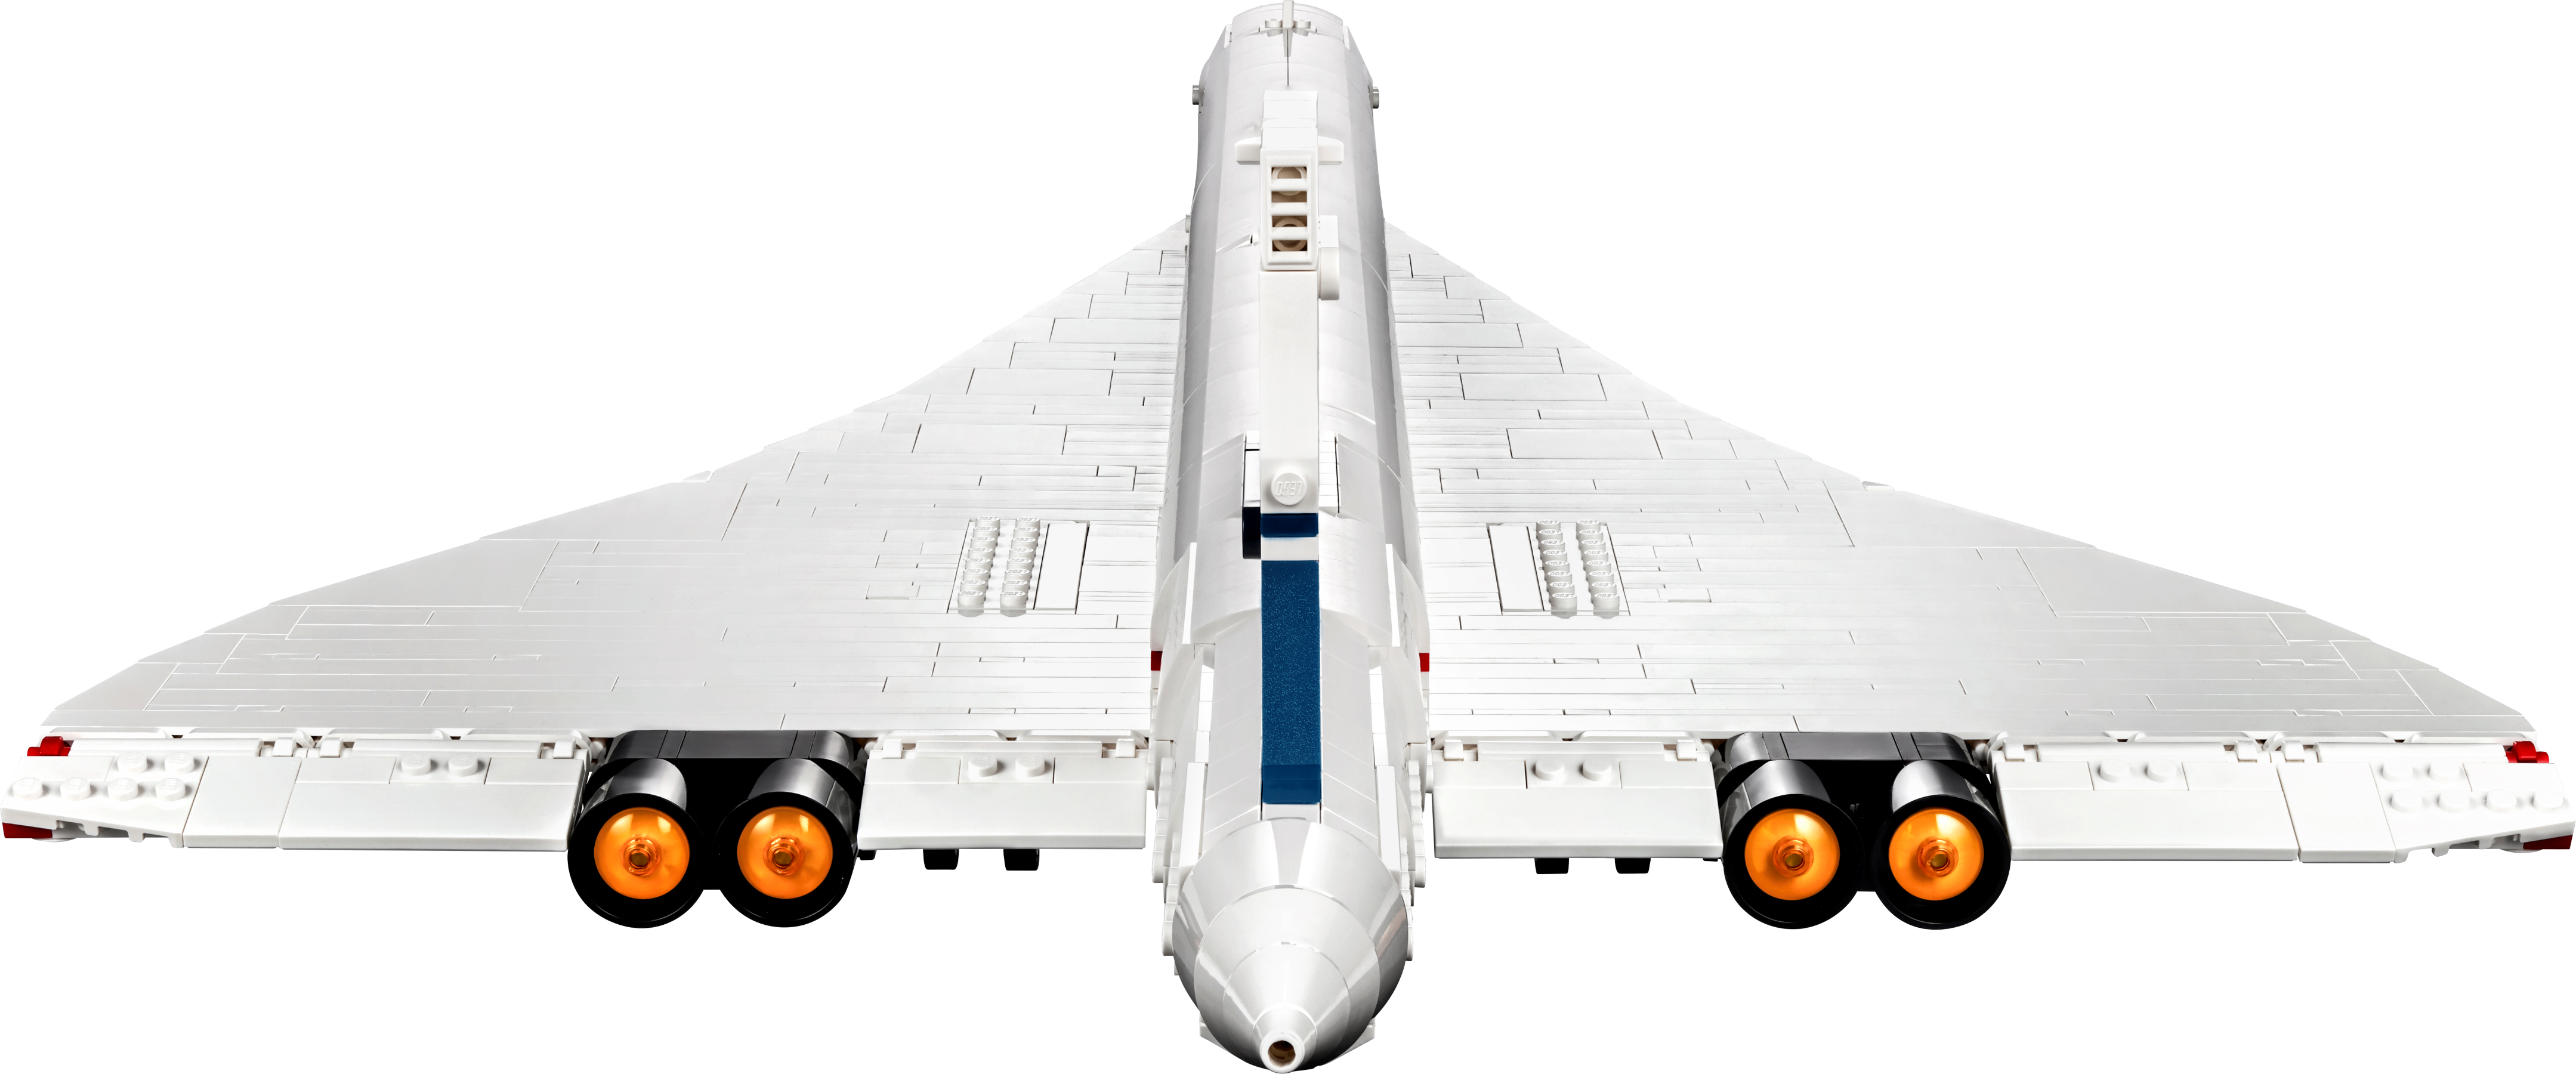 Lego Icons Concorde Jet | 10318 | Brand New | In hand Ships Next Day